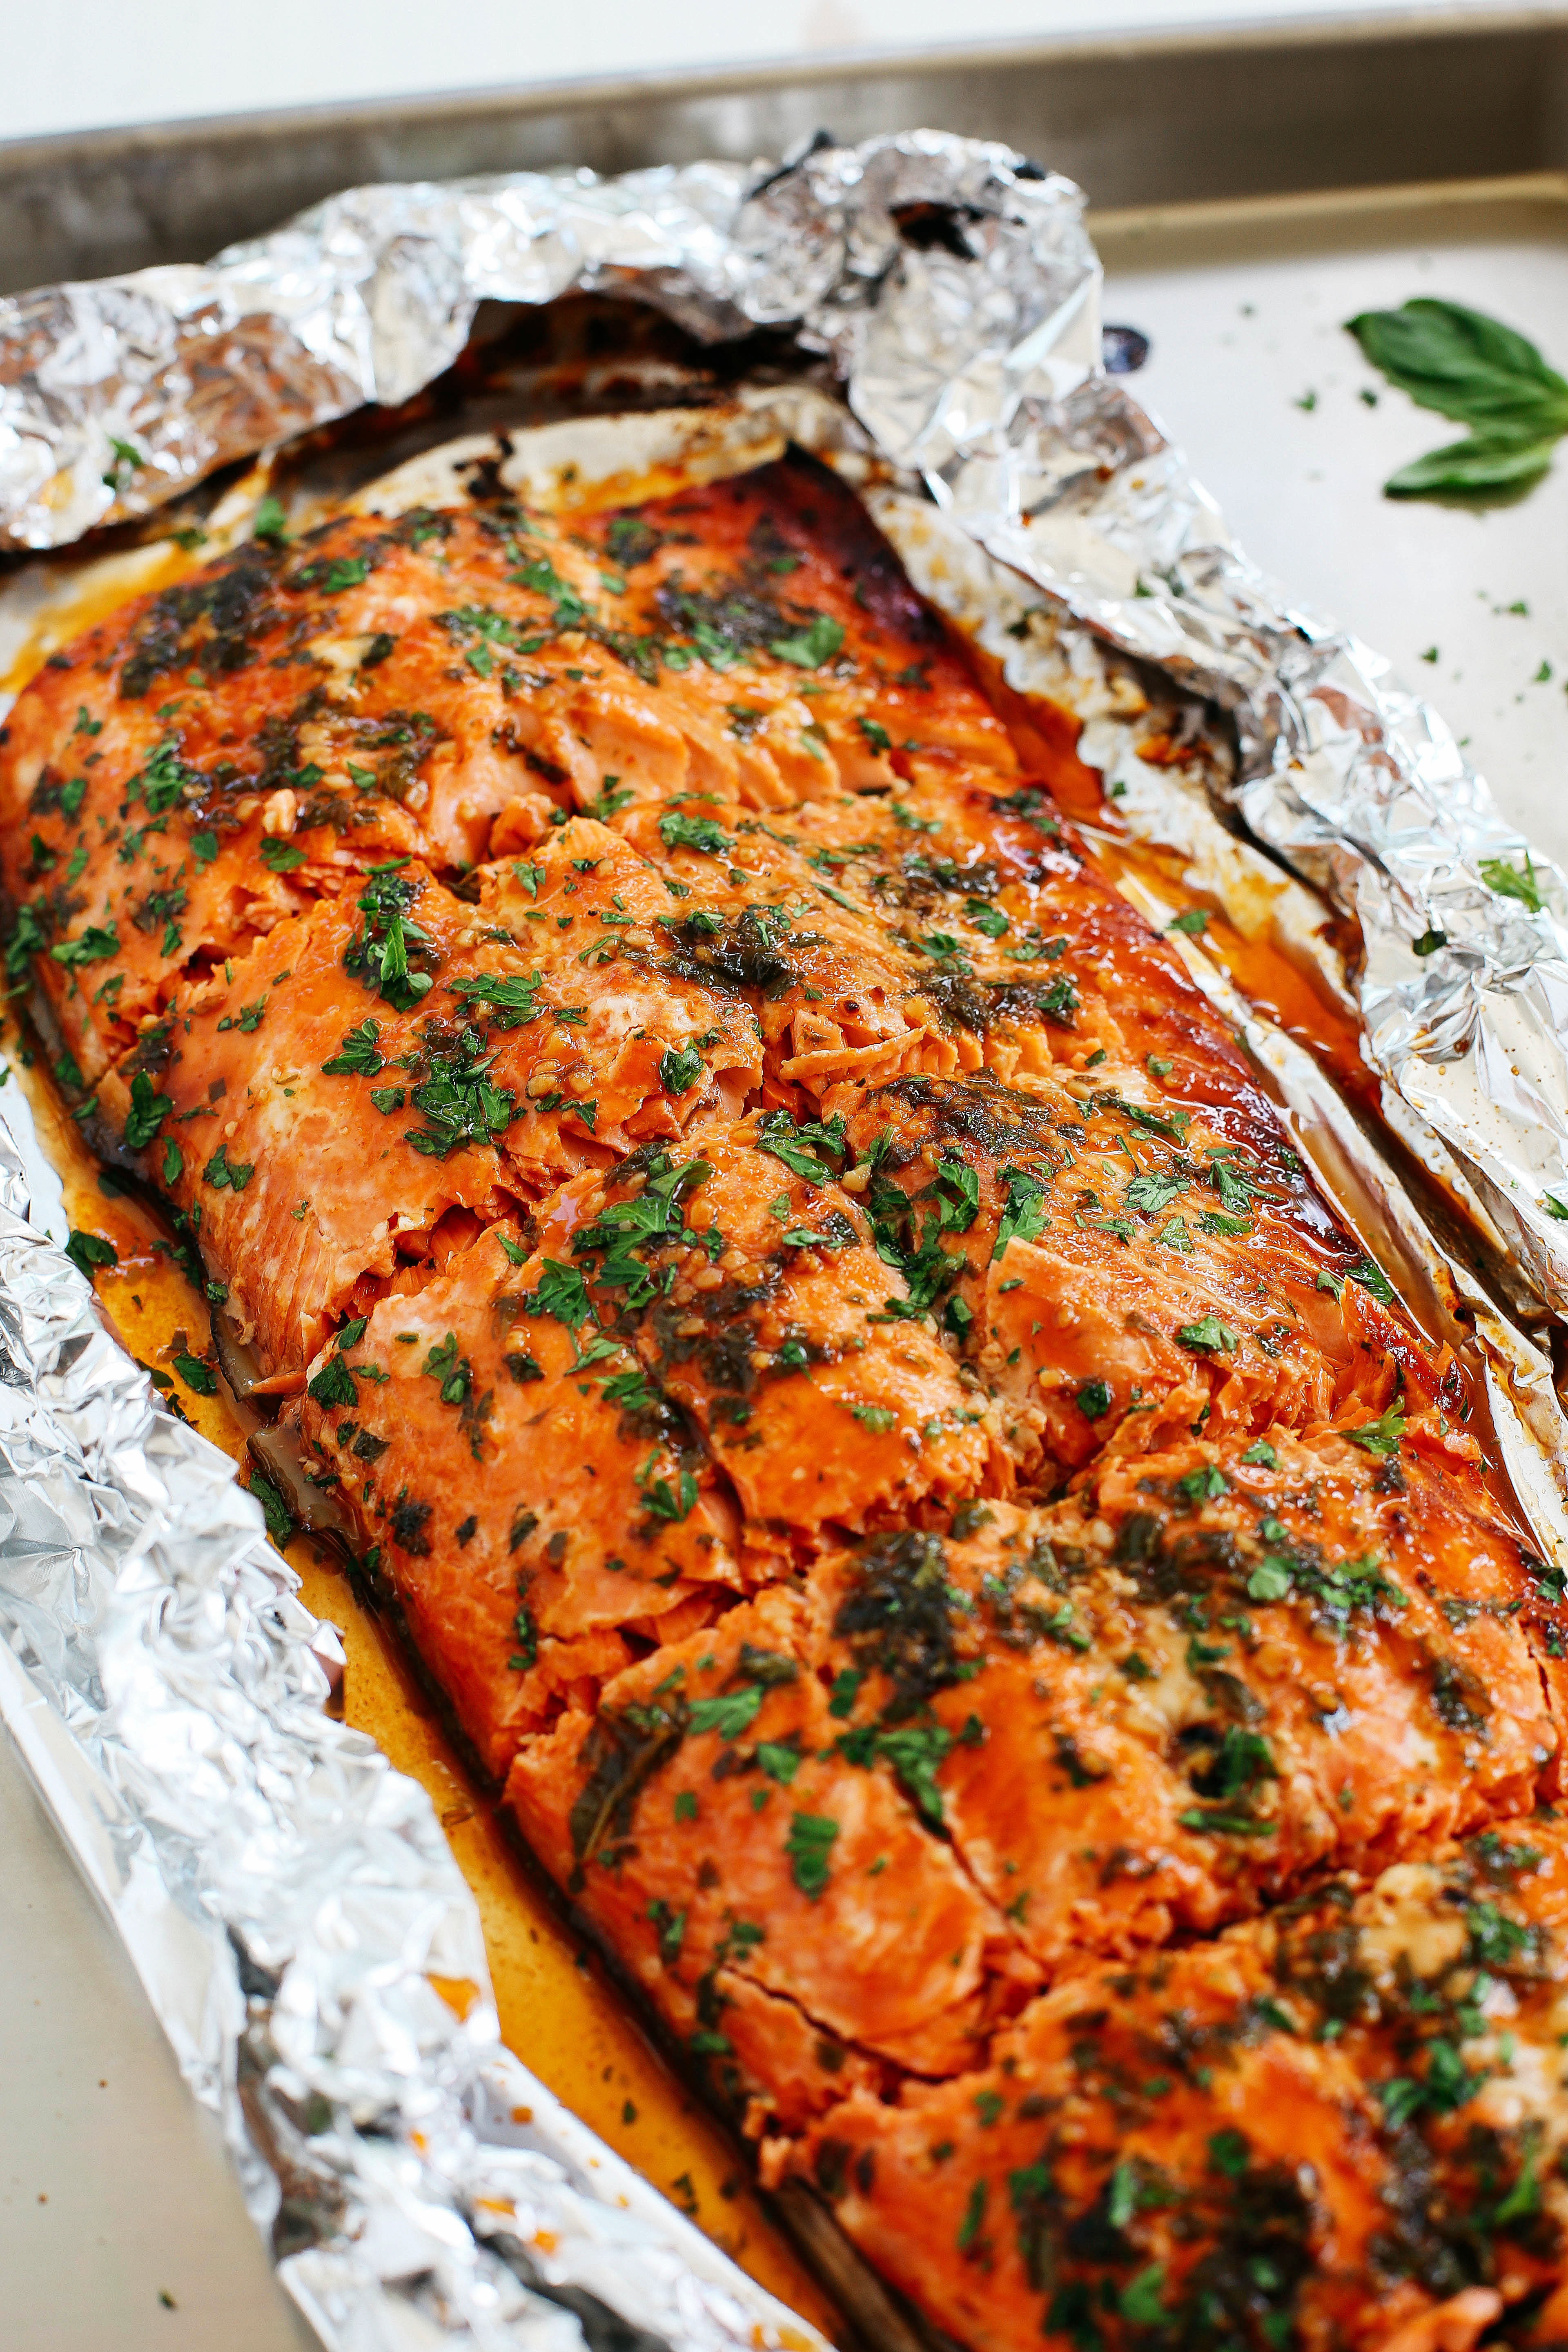 This delicious Ginger Basil Salmon in Foil is the perfect weeknight dinner that's healthy, easy to prepare, and ready in just 20 minutes!